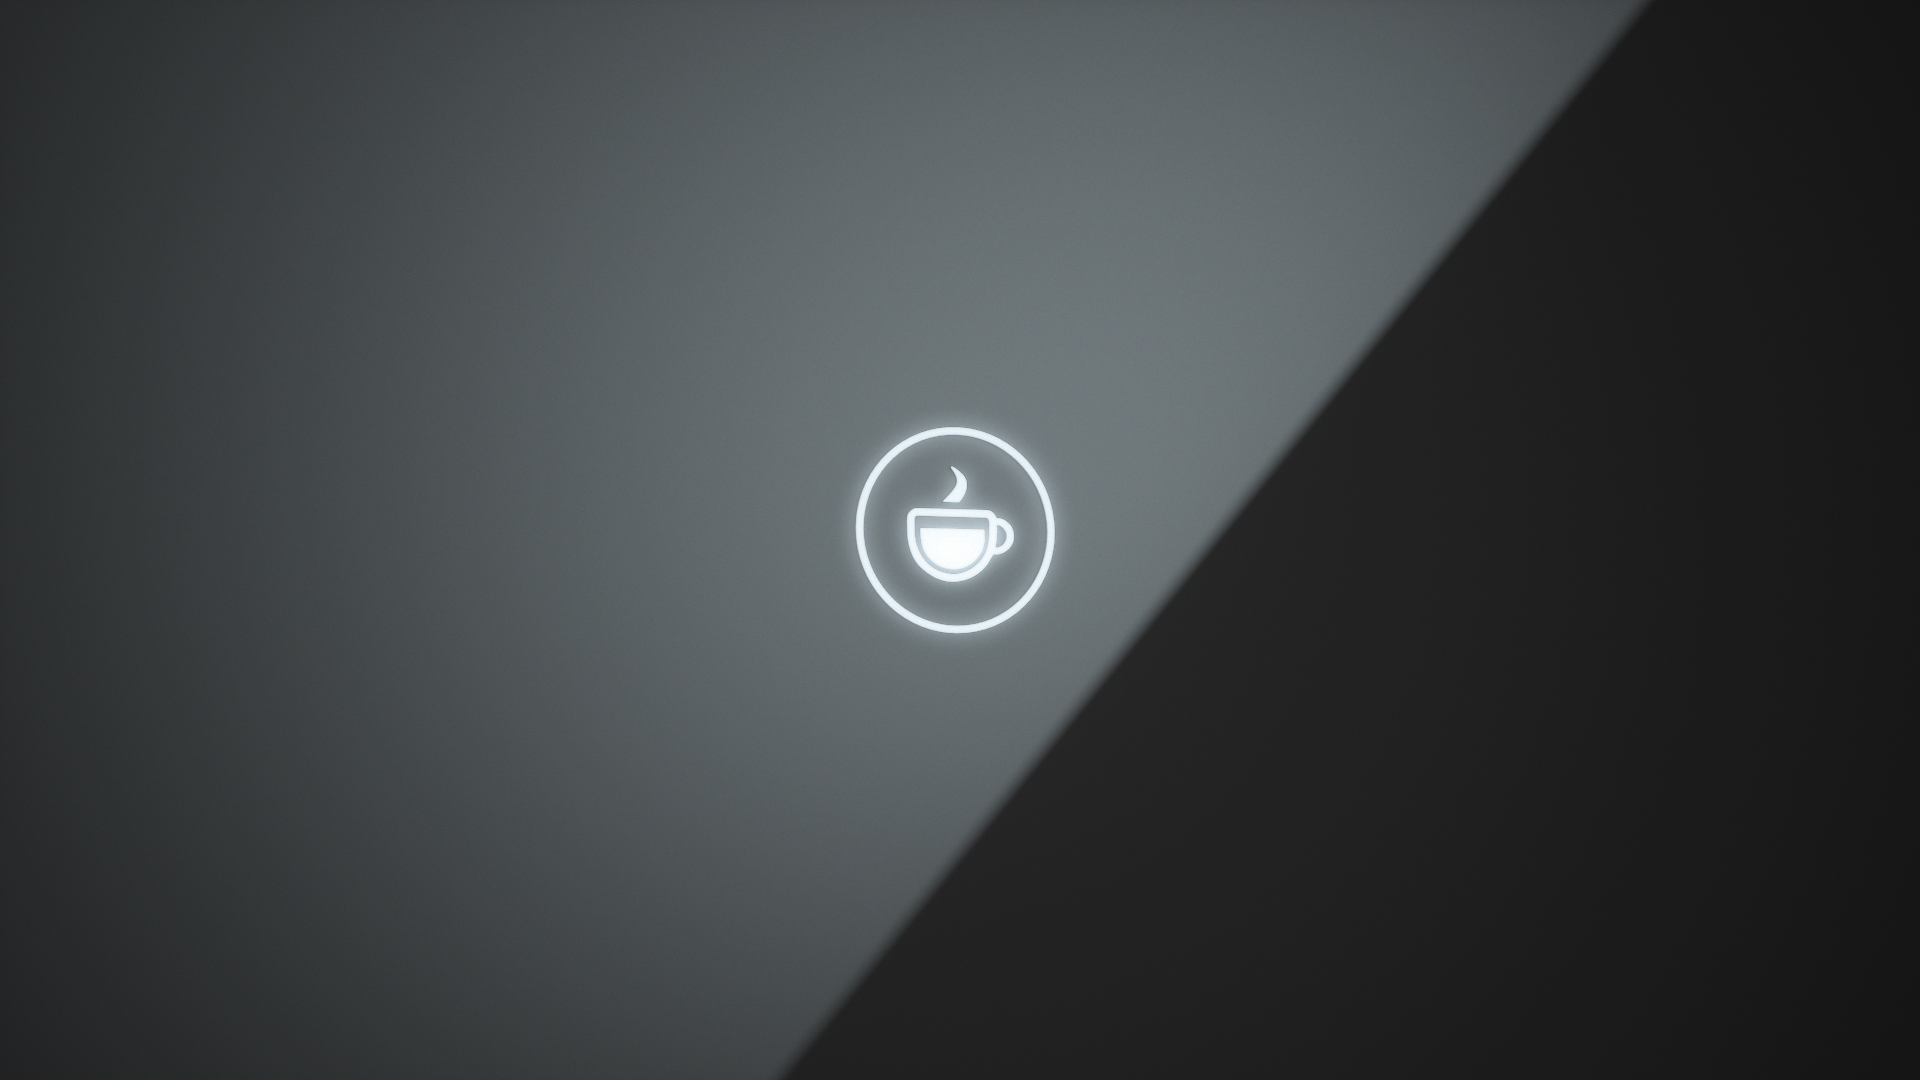 Coffee cup icon on a black glass panel